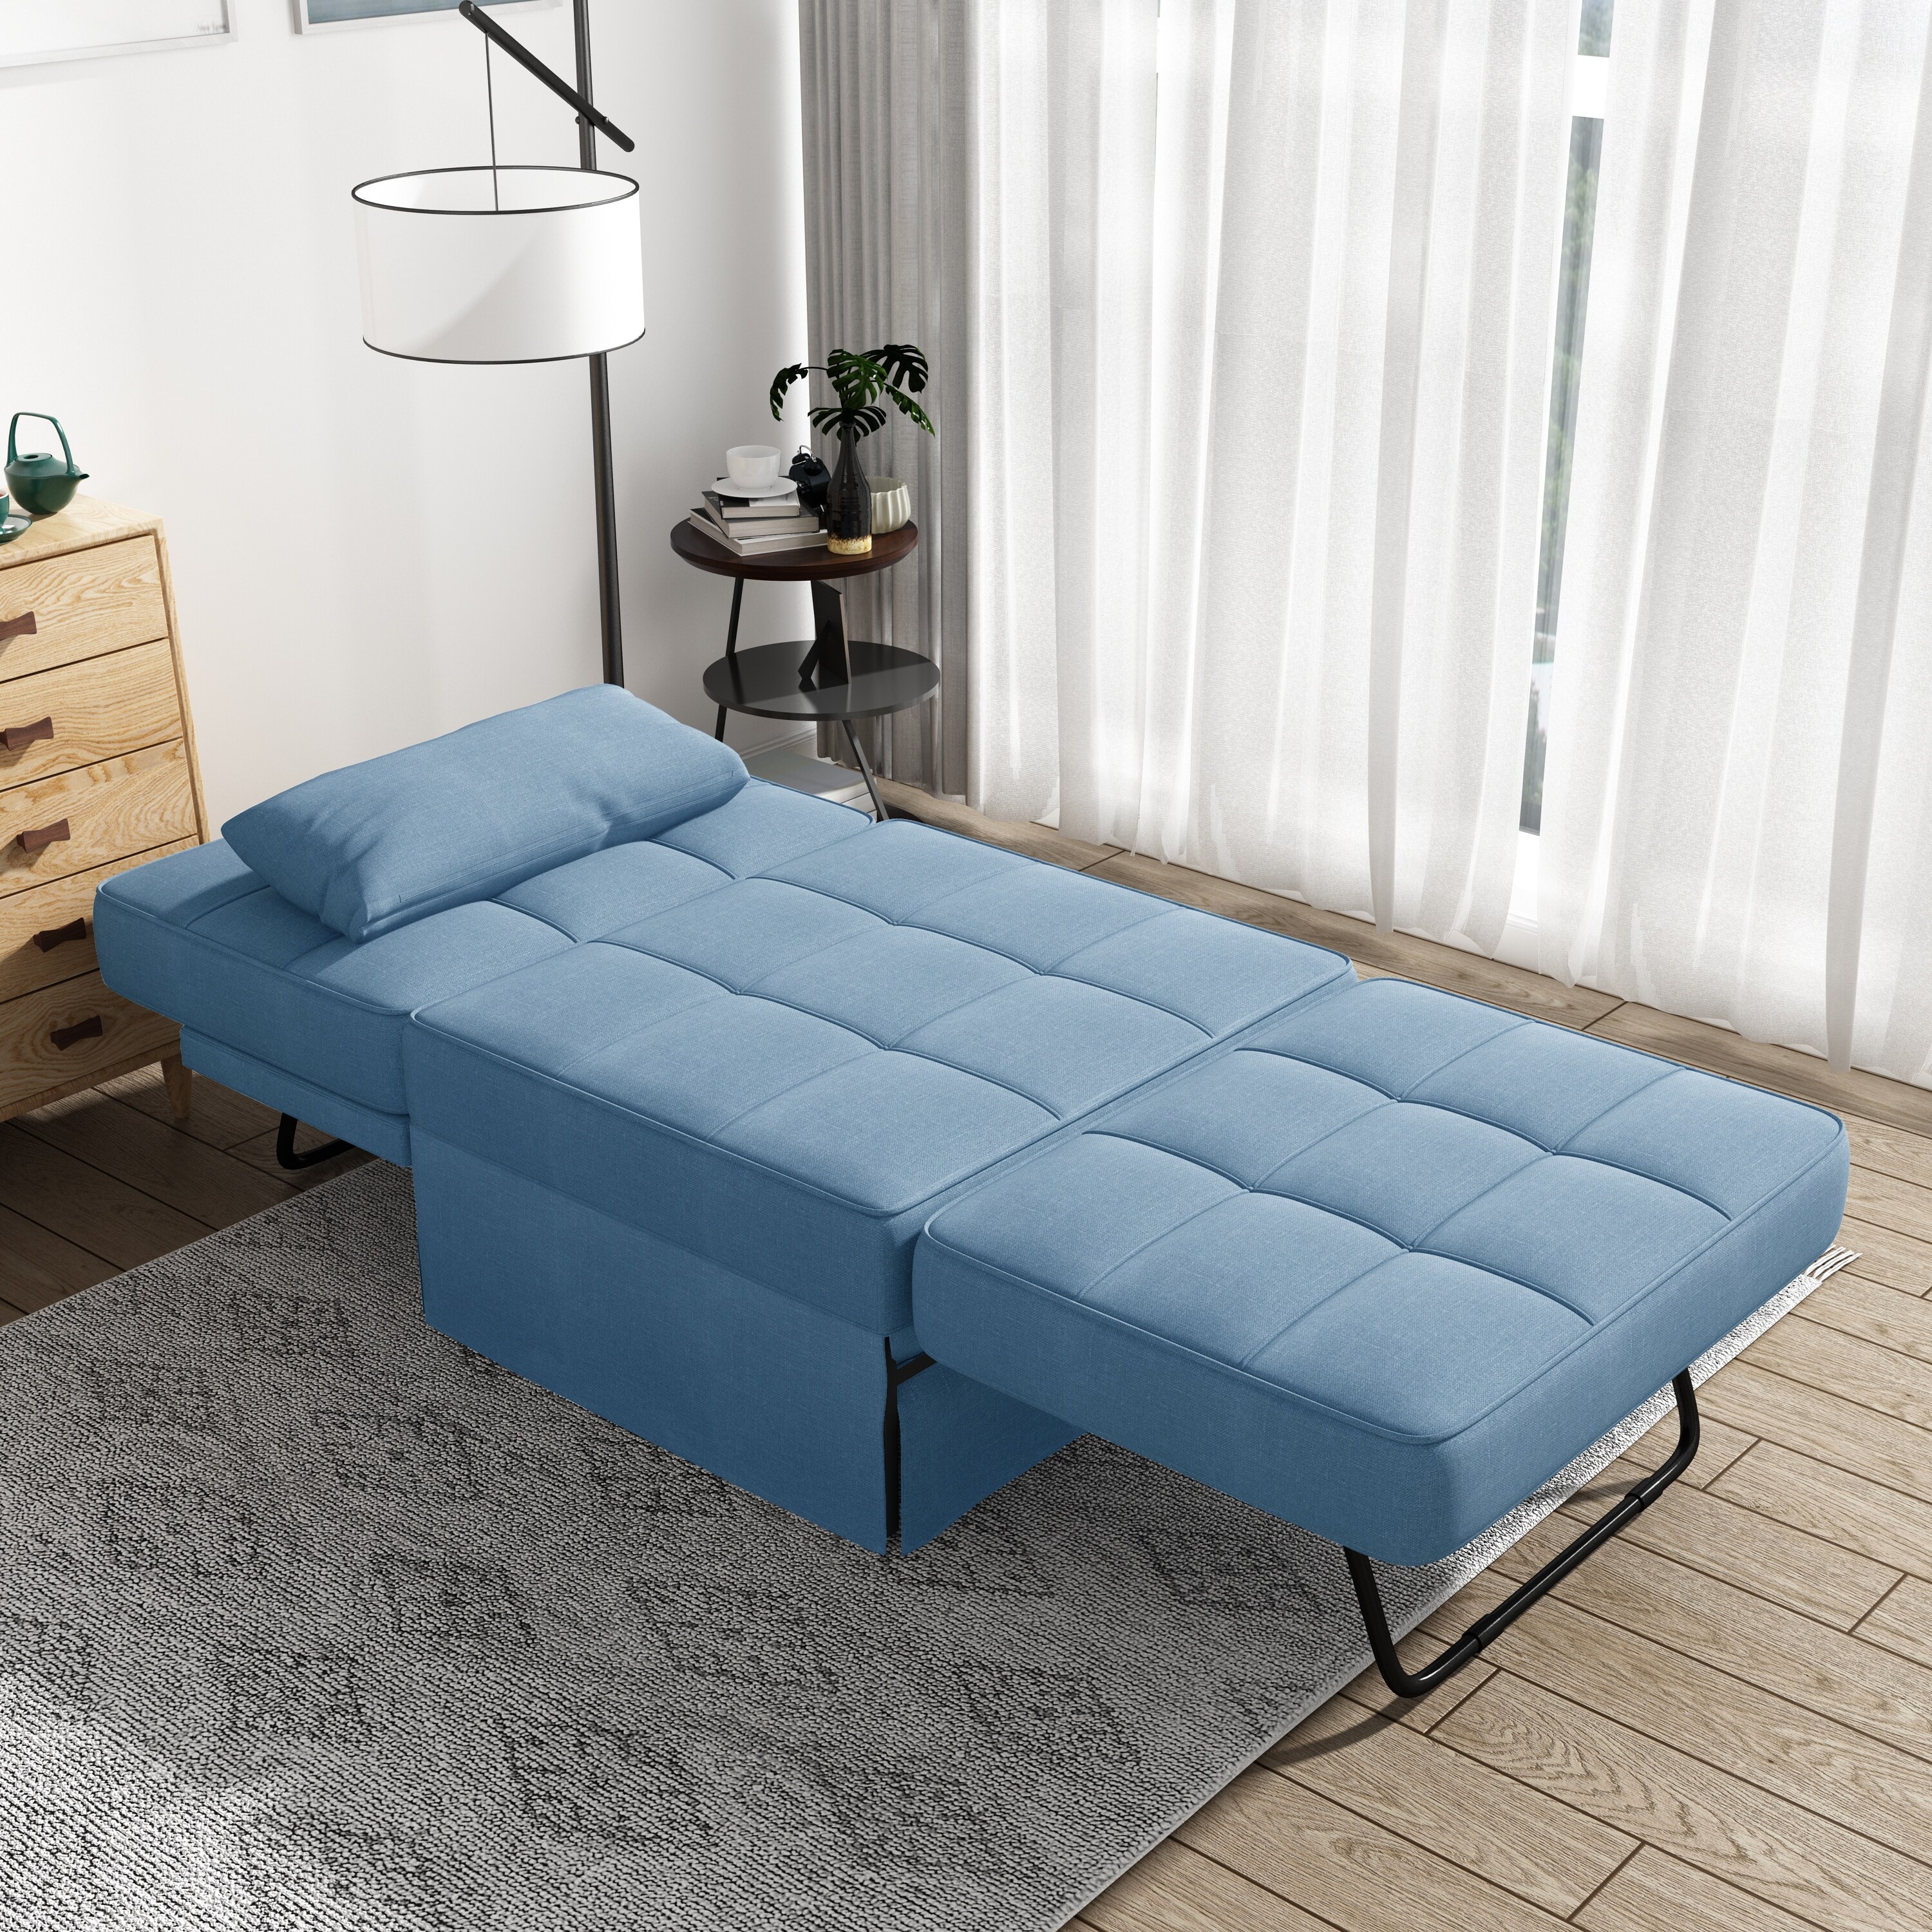 https://ak1.ostkcdn.com/images/products/is/images/direct/dbb7c6fad40d3345994f1f69a32bbe760cb3e543/Single-Sofa-Bed-Modern-Upholstery-Recliner-Bed-Ottoman-for-Living-Room.jpg